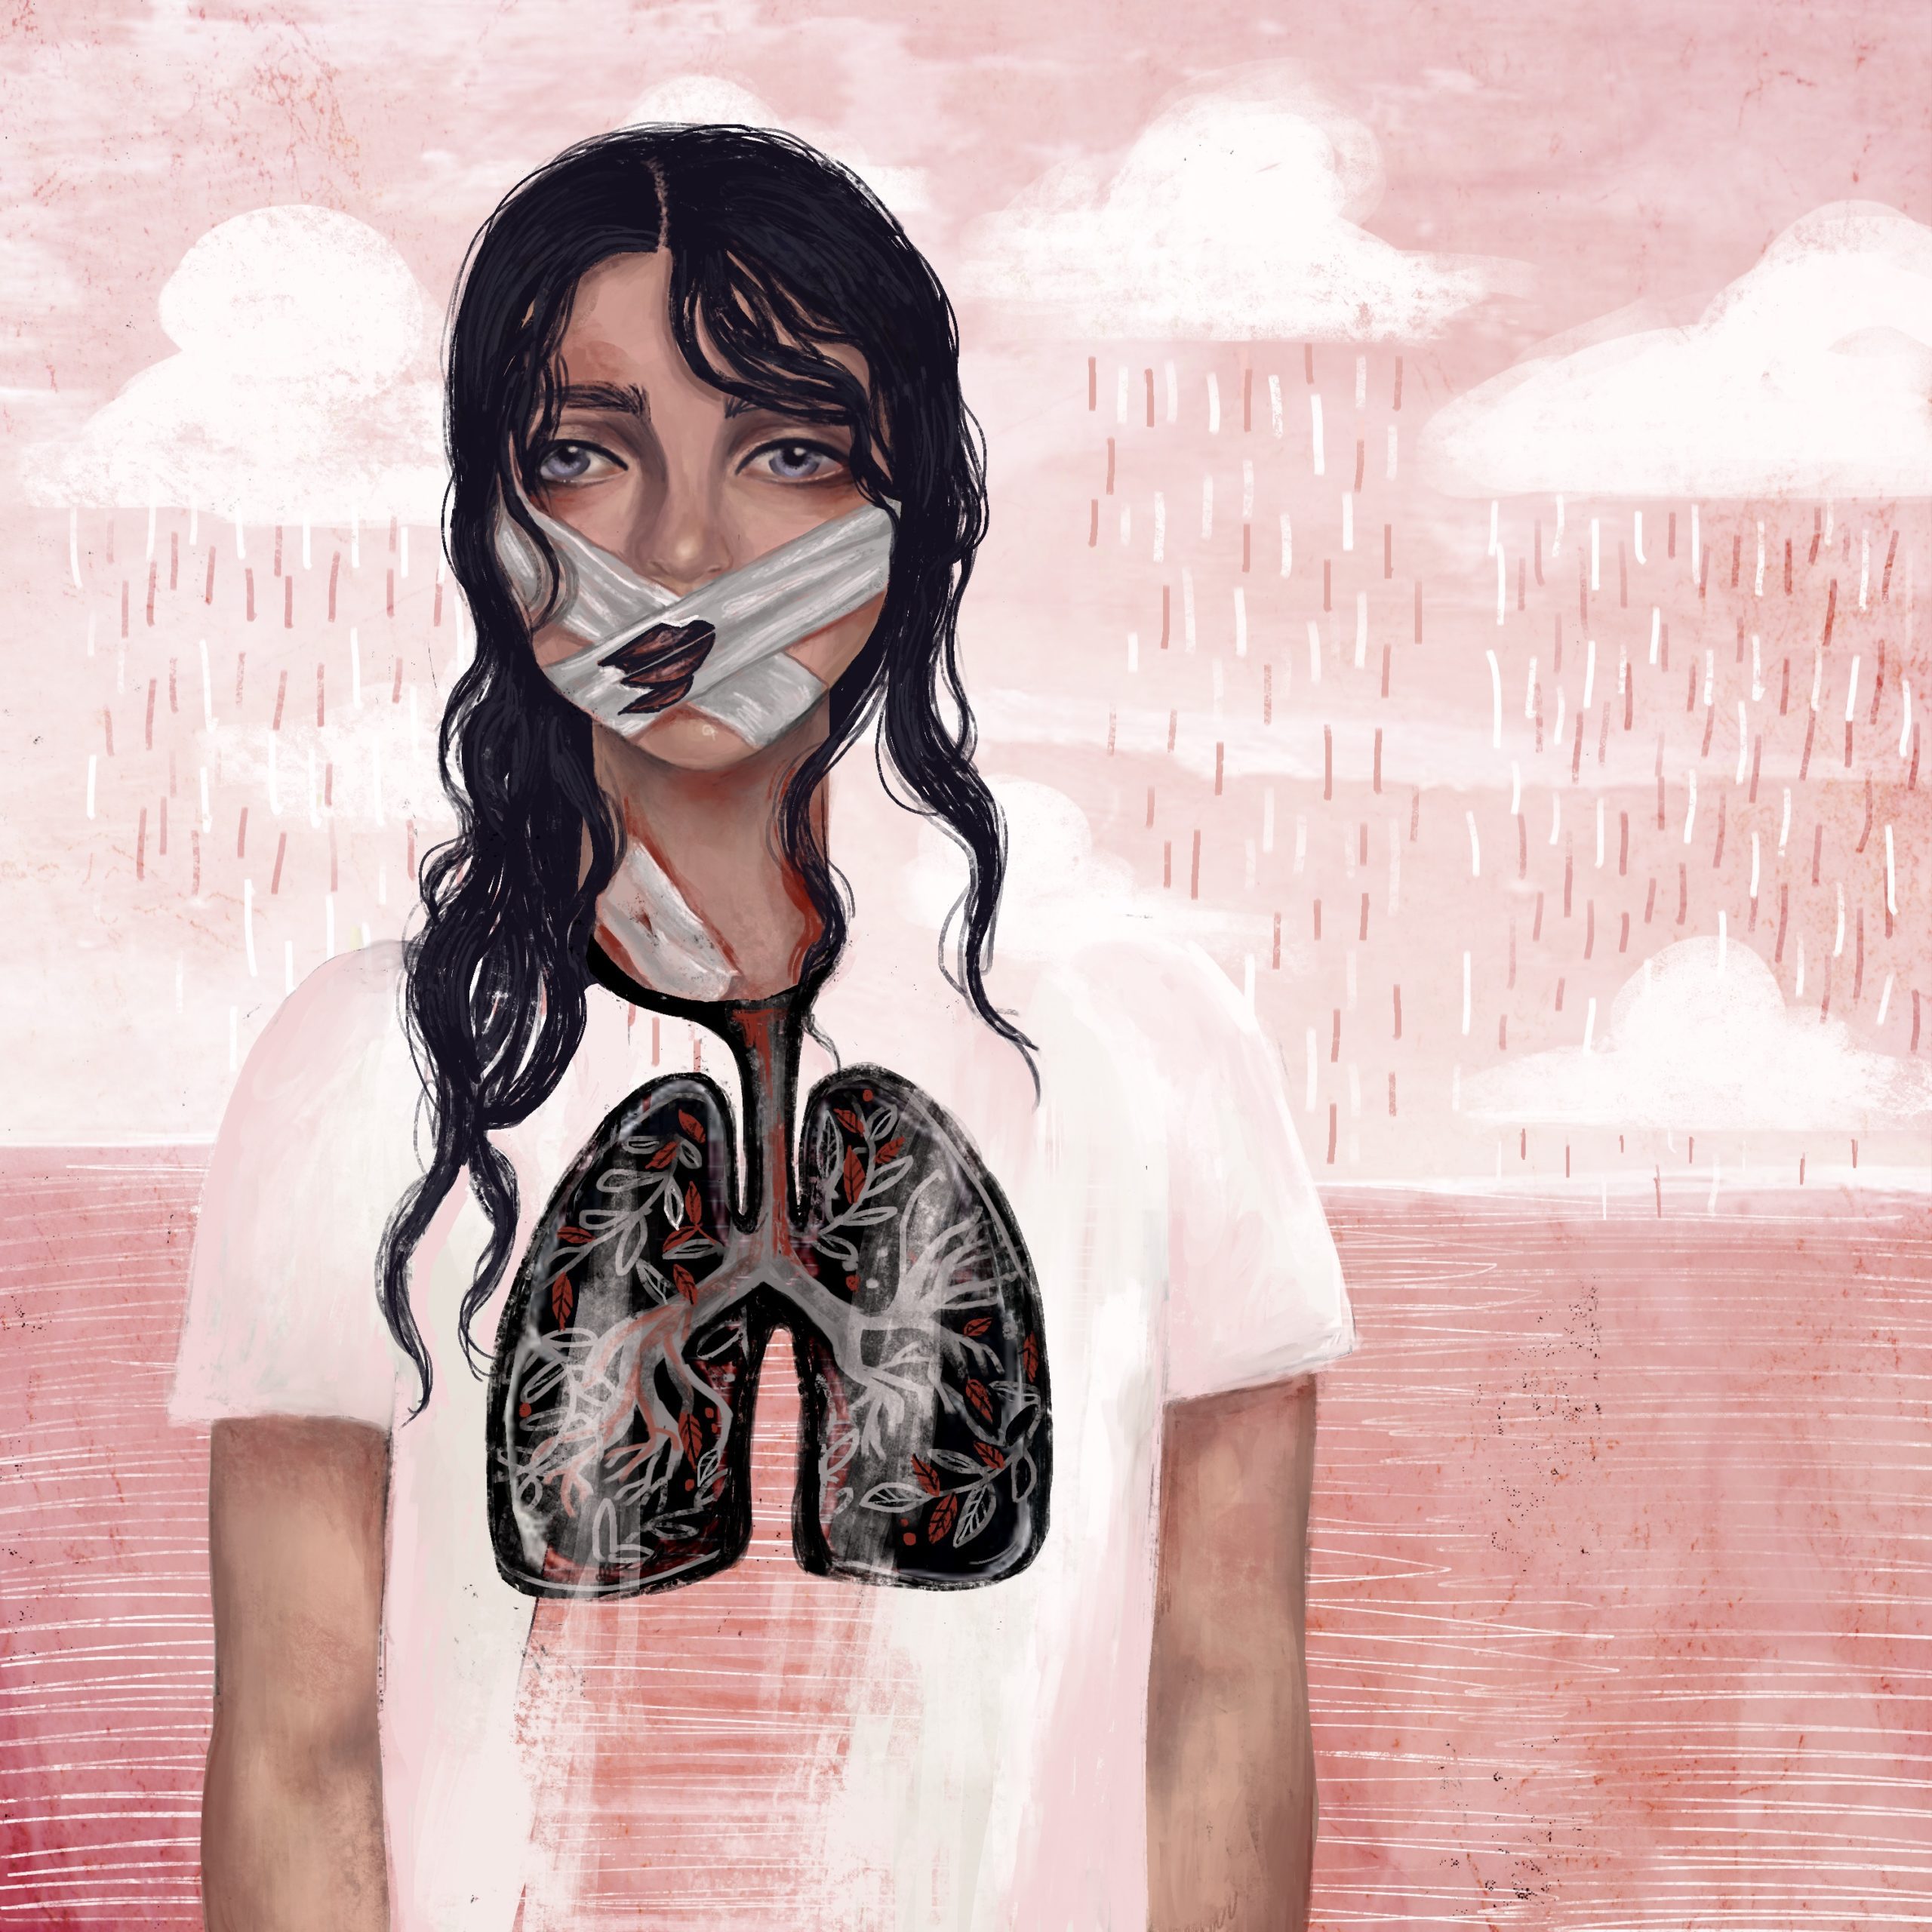 The dusty rose hued background became a through-ground when her threadbare shirt bore right through her. In lieu of breasts, her emptiness has revealed a cavity occupied by black decaying lungs, a root system of bronchioles interspersed with branches of ivy. Her lips, displaced atop a gauze wrap, criss-crossing her mouth, an allude to a wound. She is in a state of emergency.